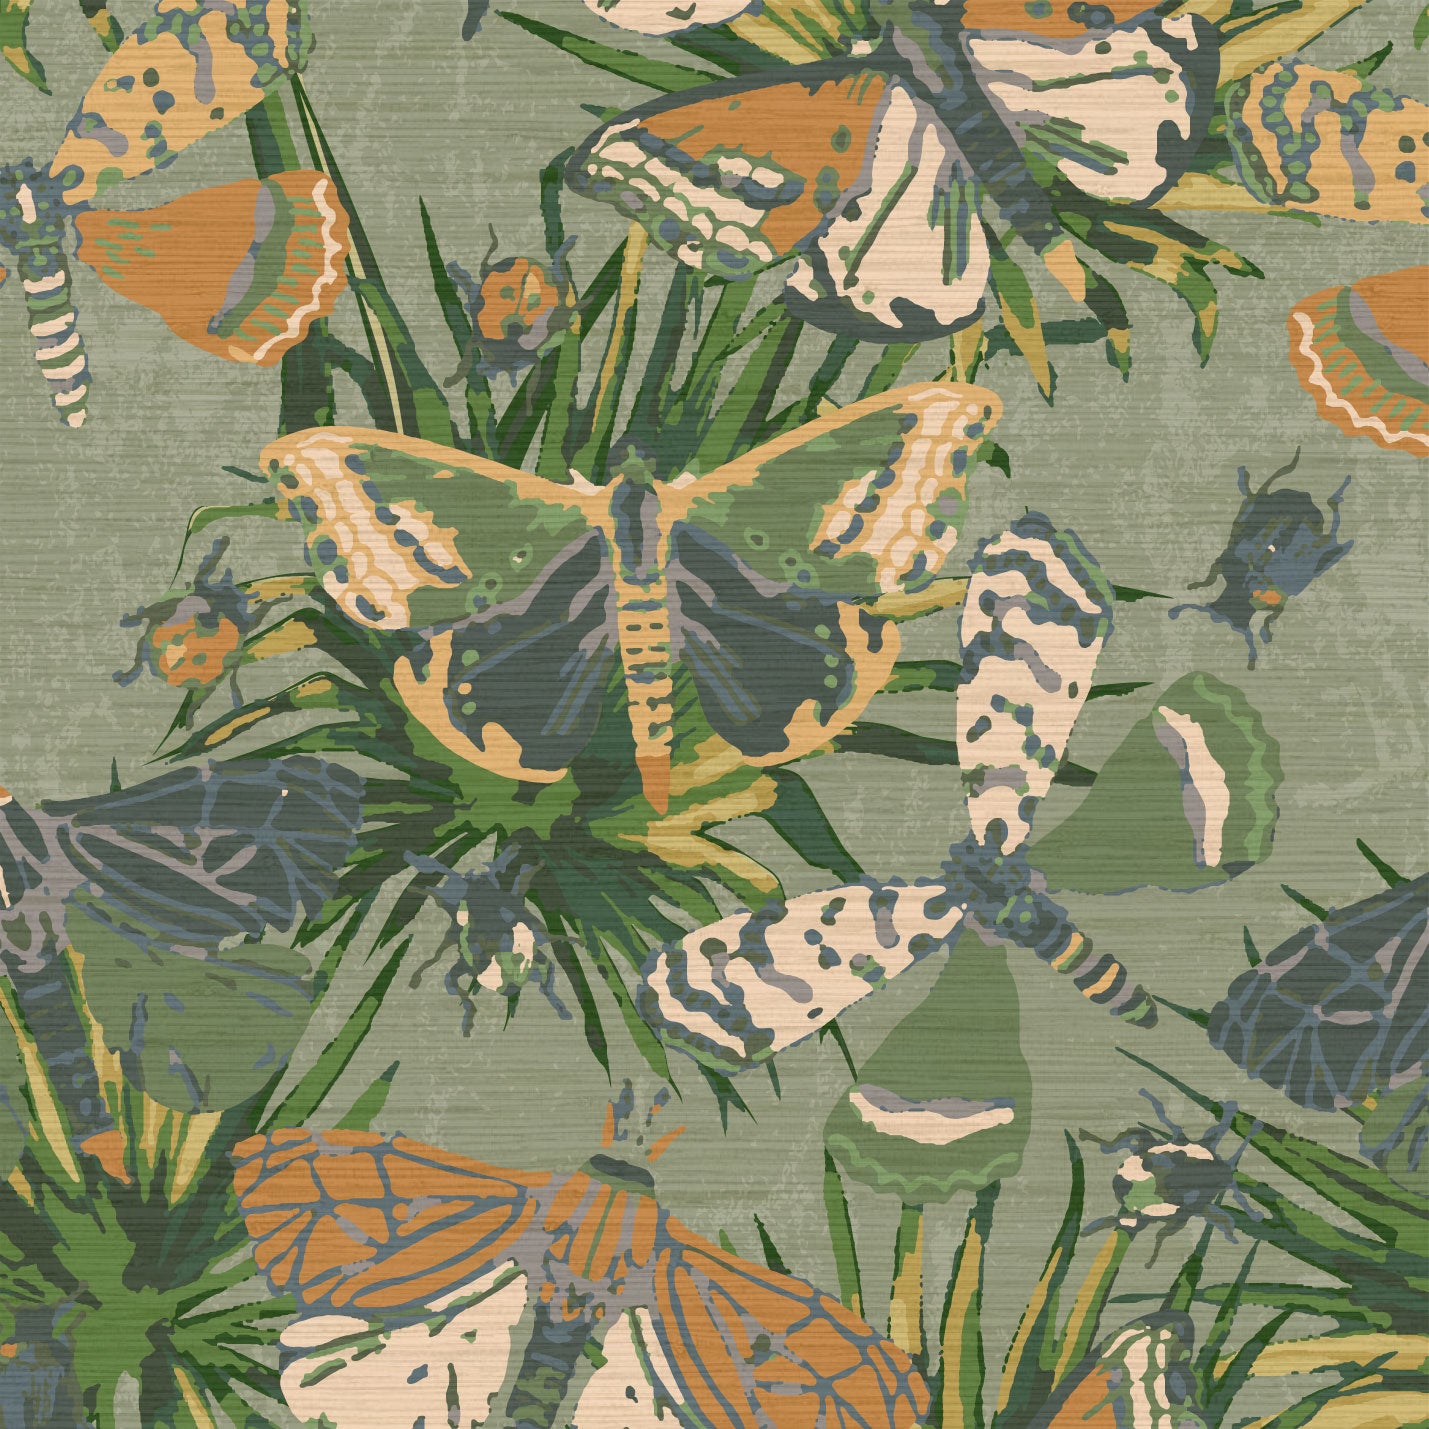 Grasscloth printed wallpaper with allover butterflies, palm leaves and mini insects overlapped in an oversized print.Grasscloth wallpaper Natural Textured Eco-Friendly Non-toxic High-quality Sustainable Interior Design Bold Custom Tailor-made Retro chic Bold tropical butterfly bug palm leaves animals botanical garden nature kids playroom bedroom nursery green moss jungle olive